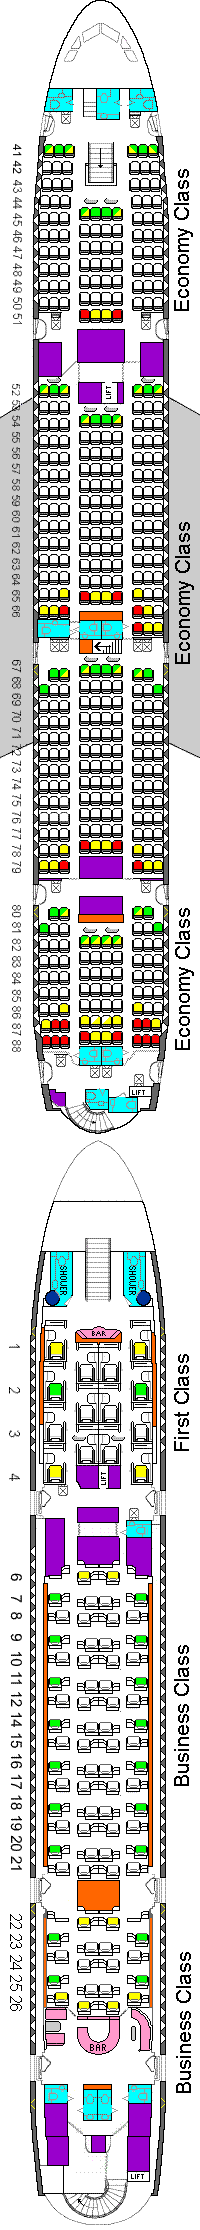 Emirates A380 Seating Plan With